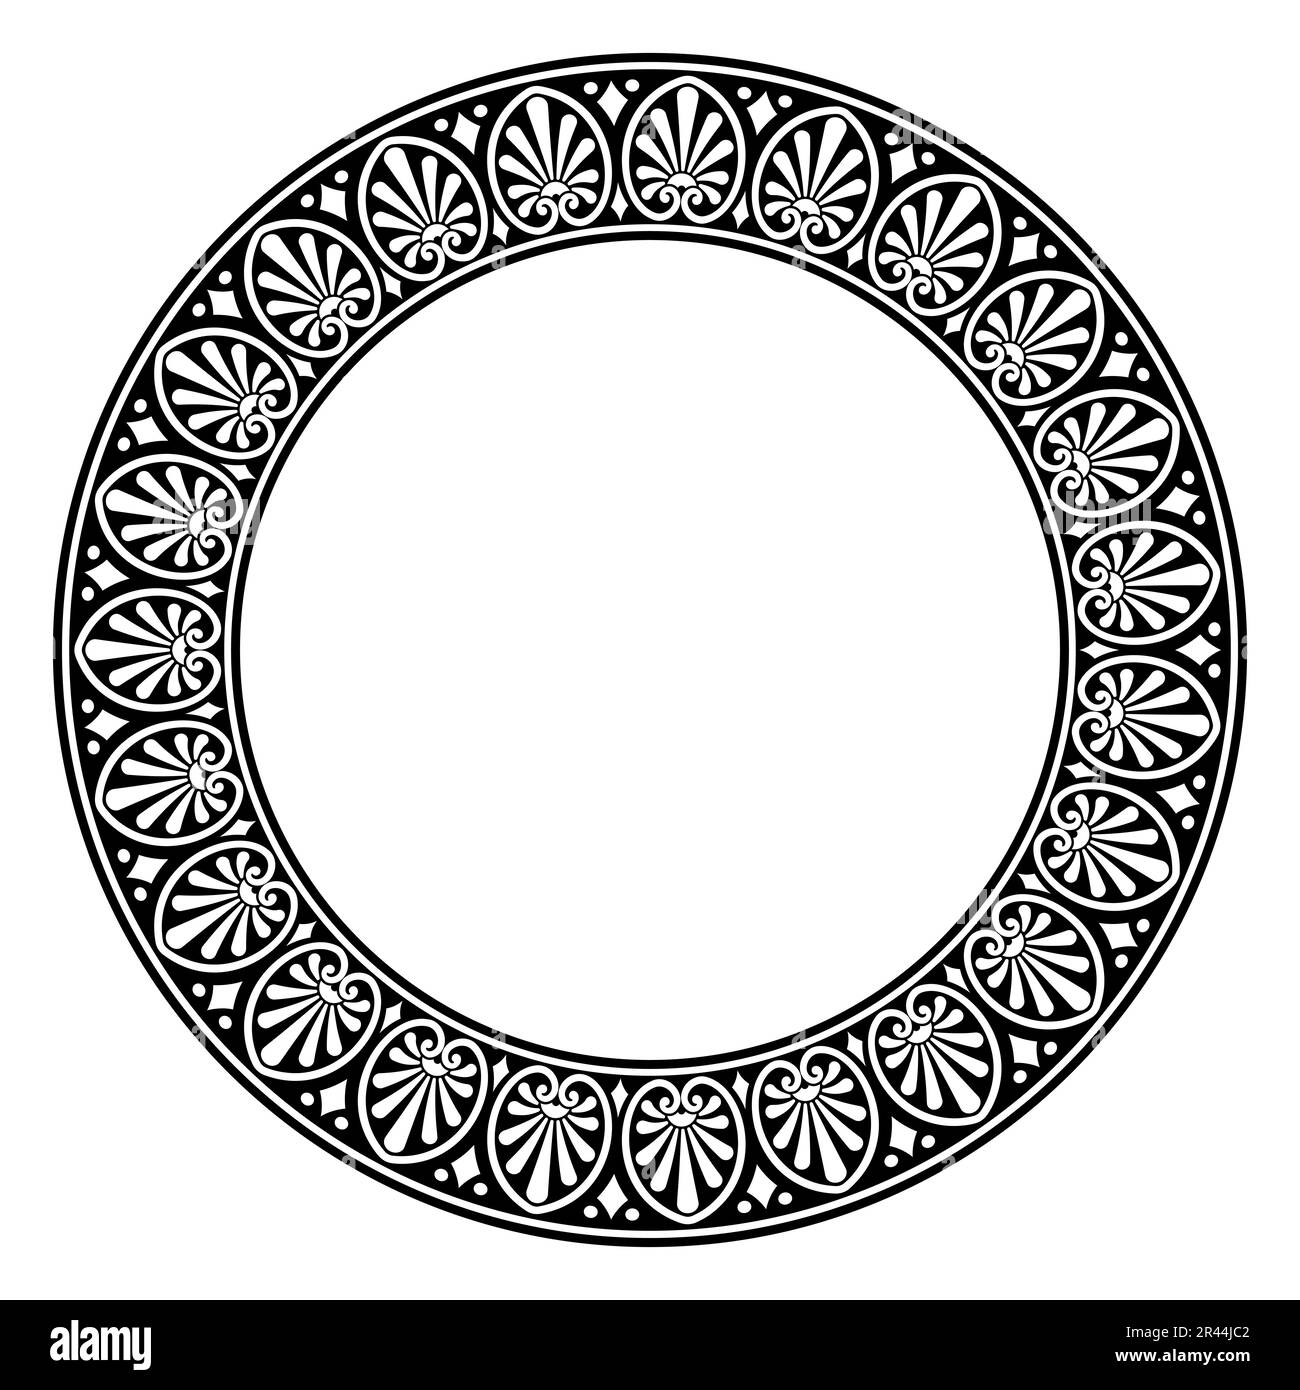 Conventional foliage, circle frame with Classical Greek pattern. Decorative circular border, made of repeated conventional leafage pattern. Stock Photo